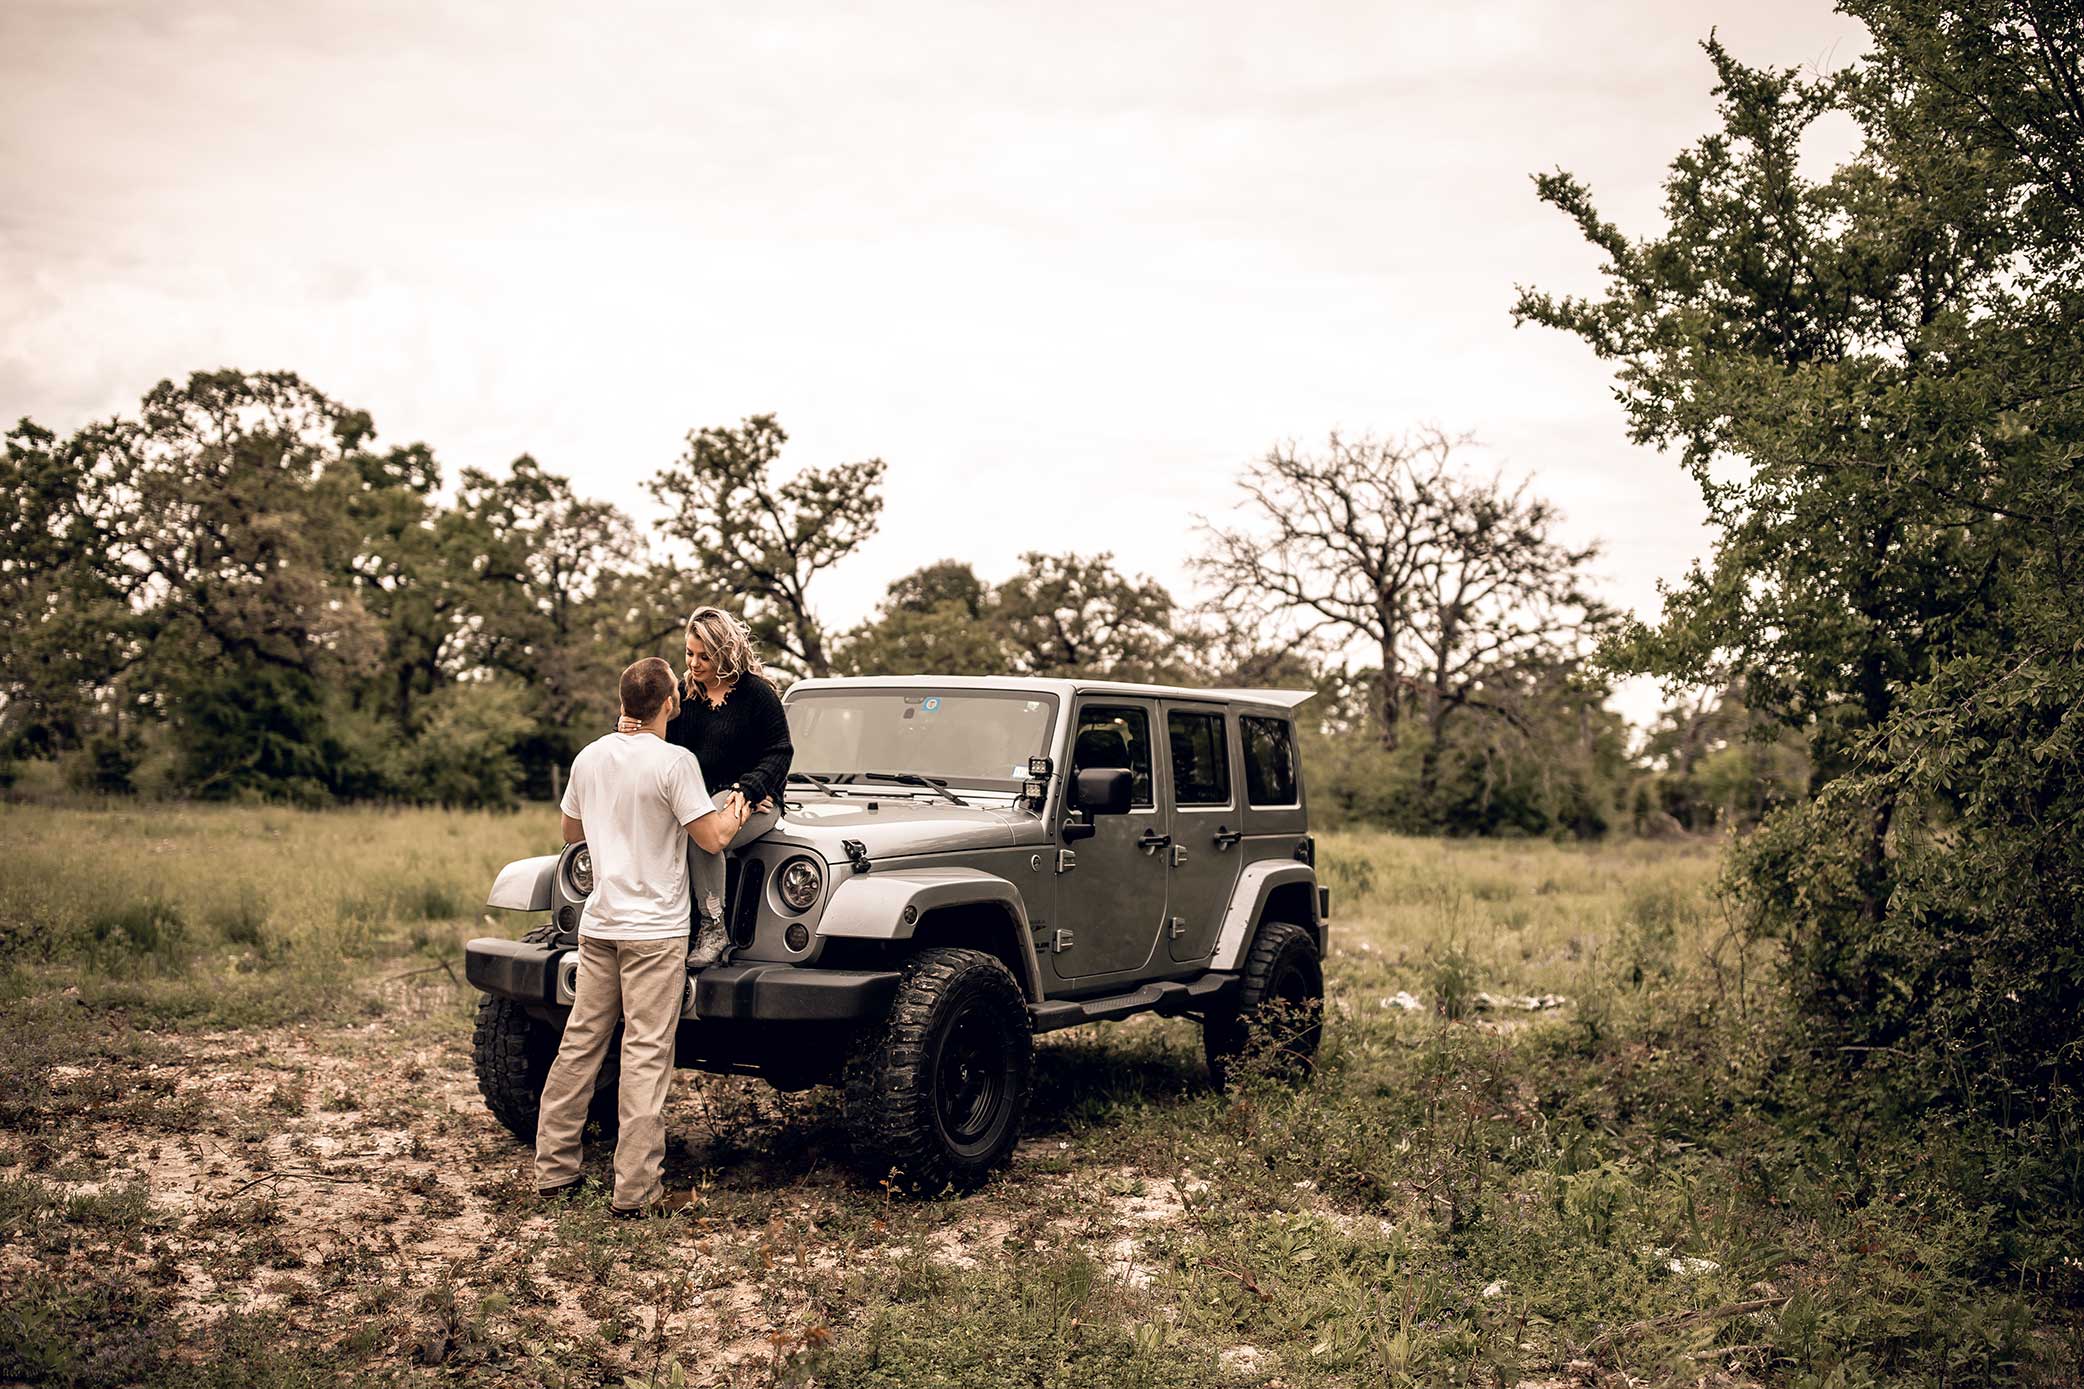 shelby-schiller-photography-lifestyle-couples-remi-colt-outdoor-jeep-adventure-1.jpg